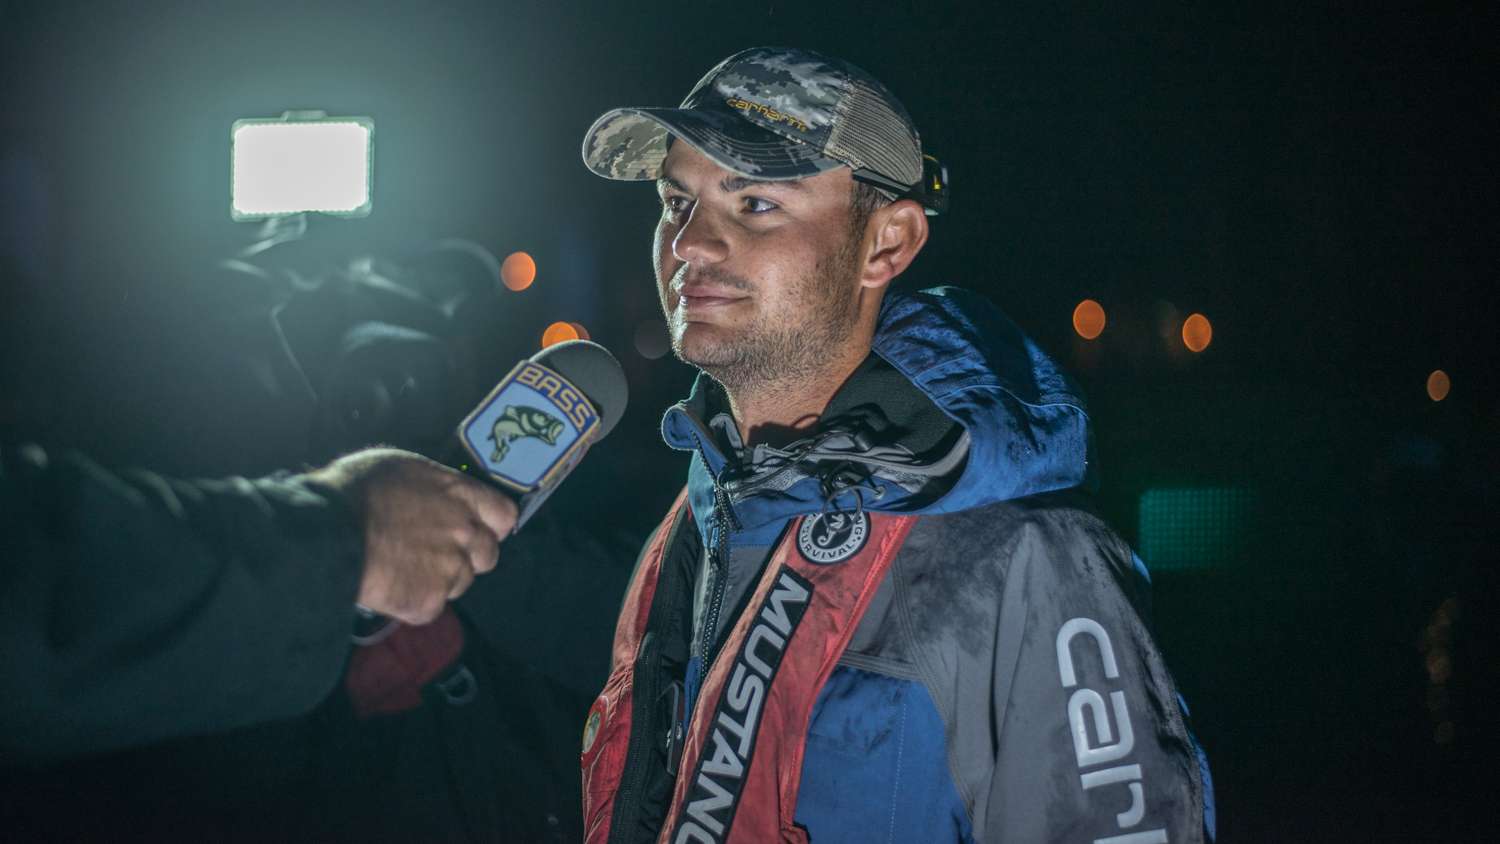 Jordan Lee, currently in 2nd place will be looking to expand upon his previous two days of fishing and hopefully retake the lead from fellow competitor Ott DeFoe. 
